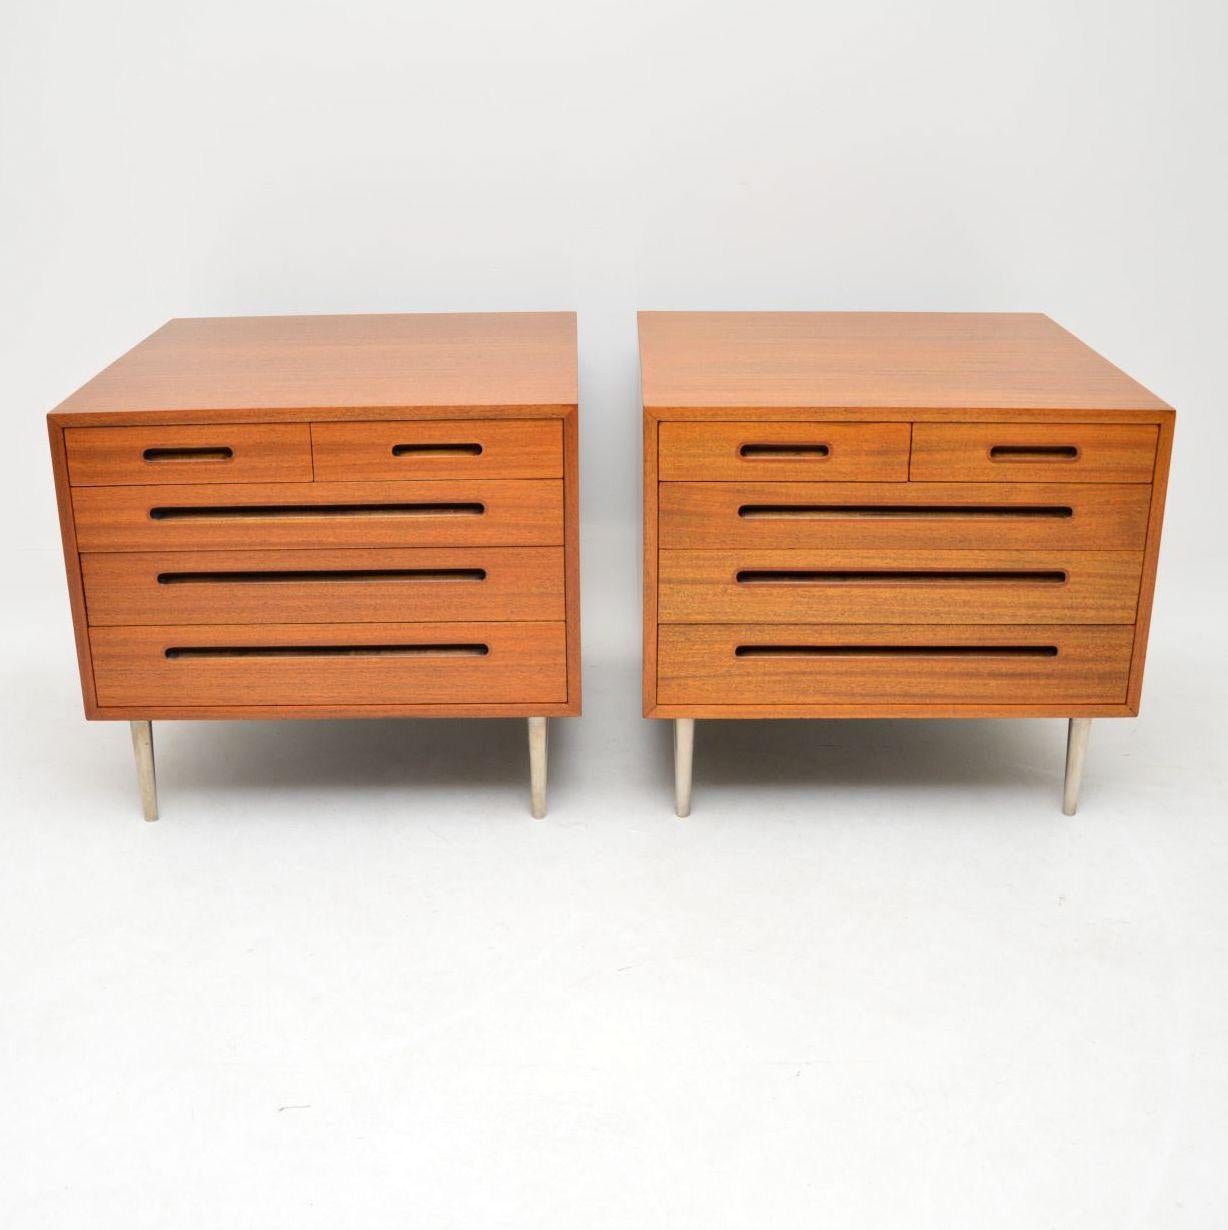 A magnificent pair of vintage chests, these were made in the USA by Dunbar furniture, they were designed by Edward Wormley.

Edward Wormley was one of the leading pioneers of mid-century modern design in America, his designs are highly sought after